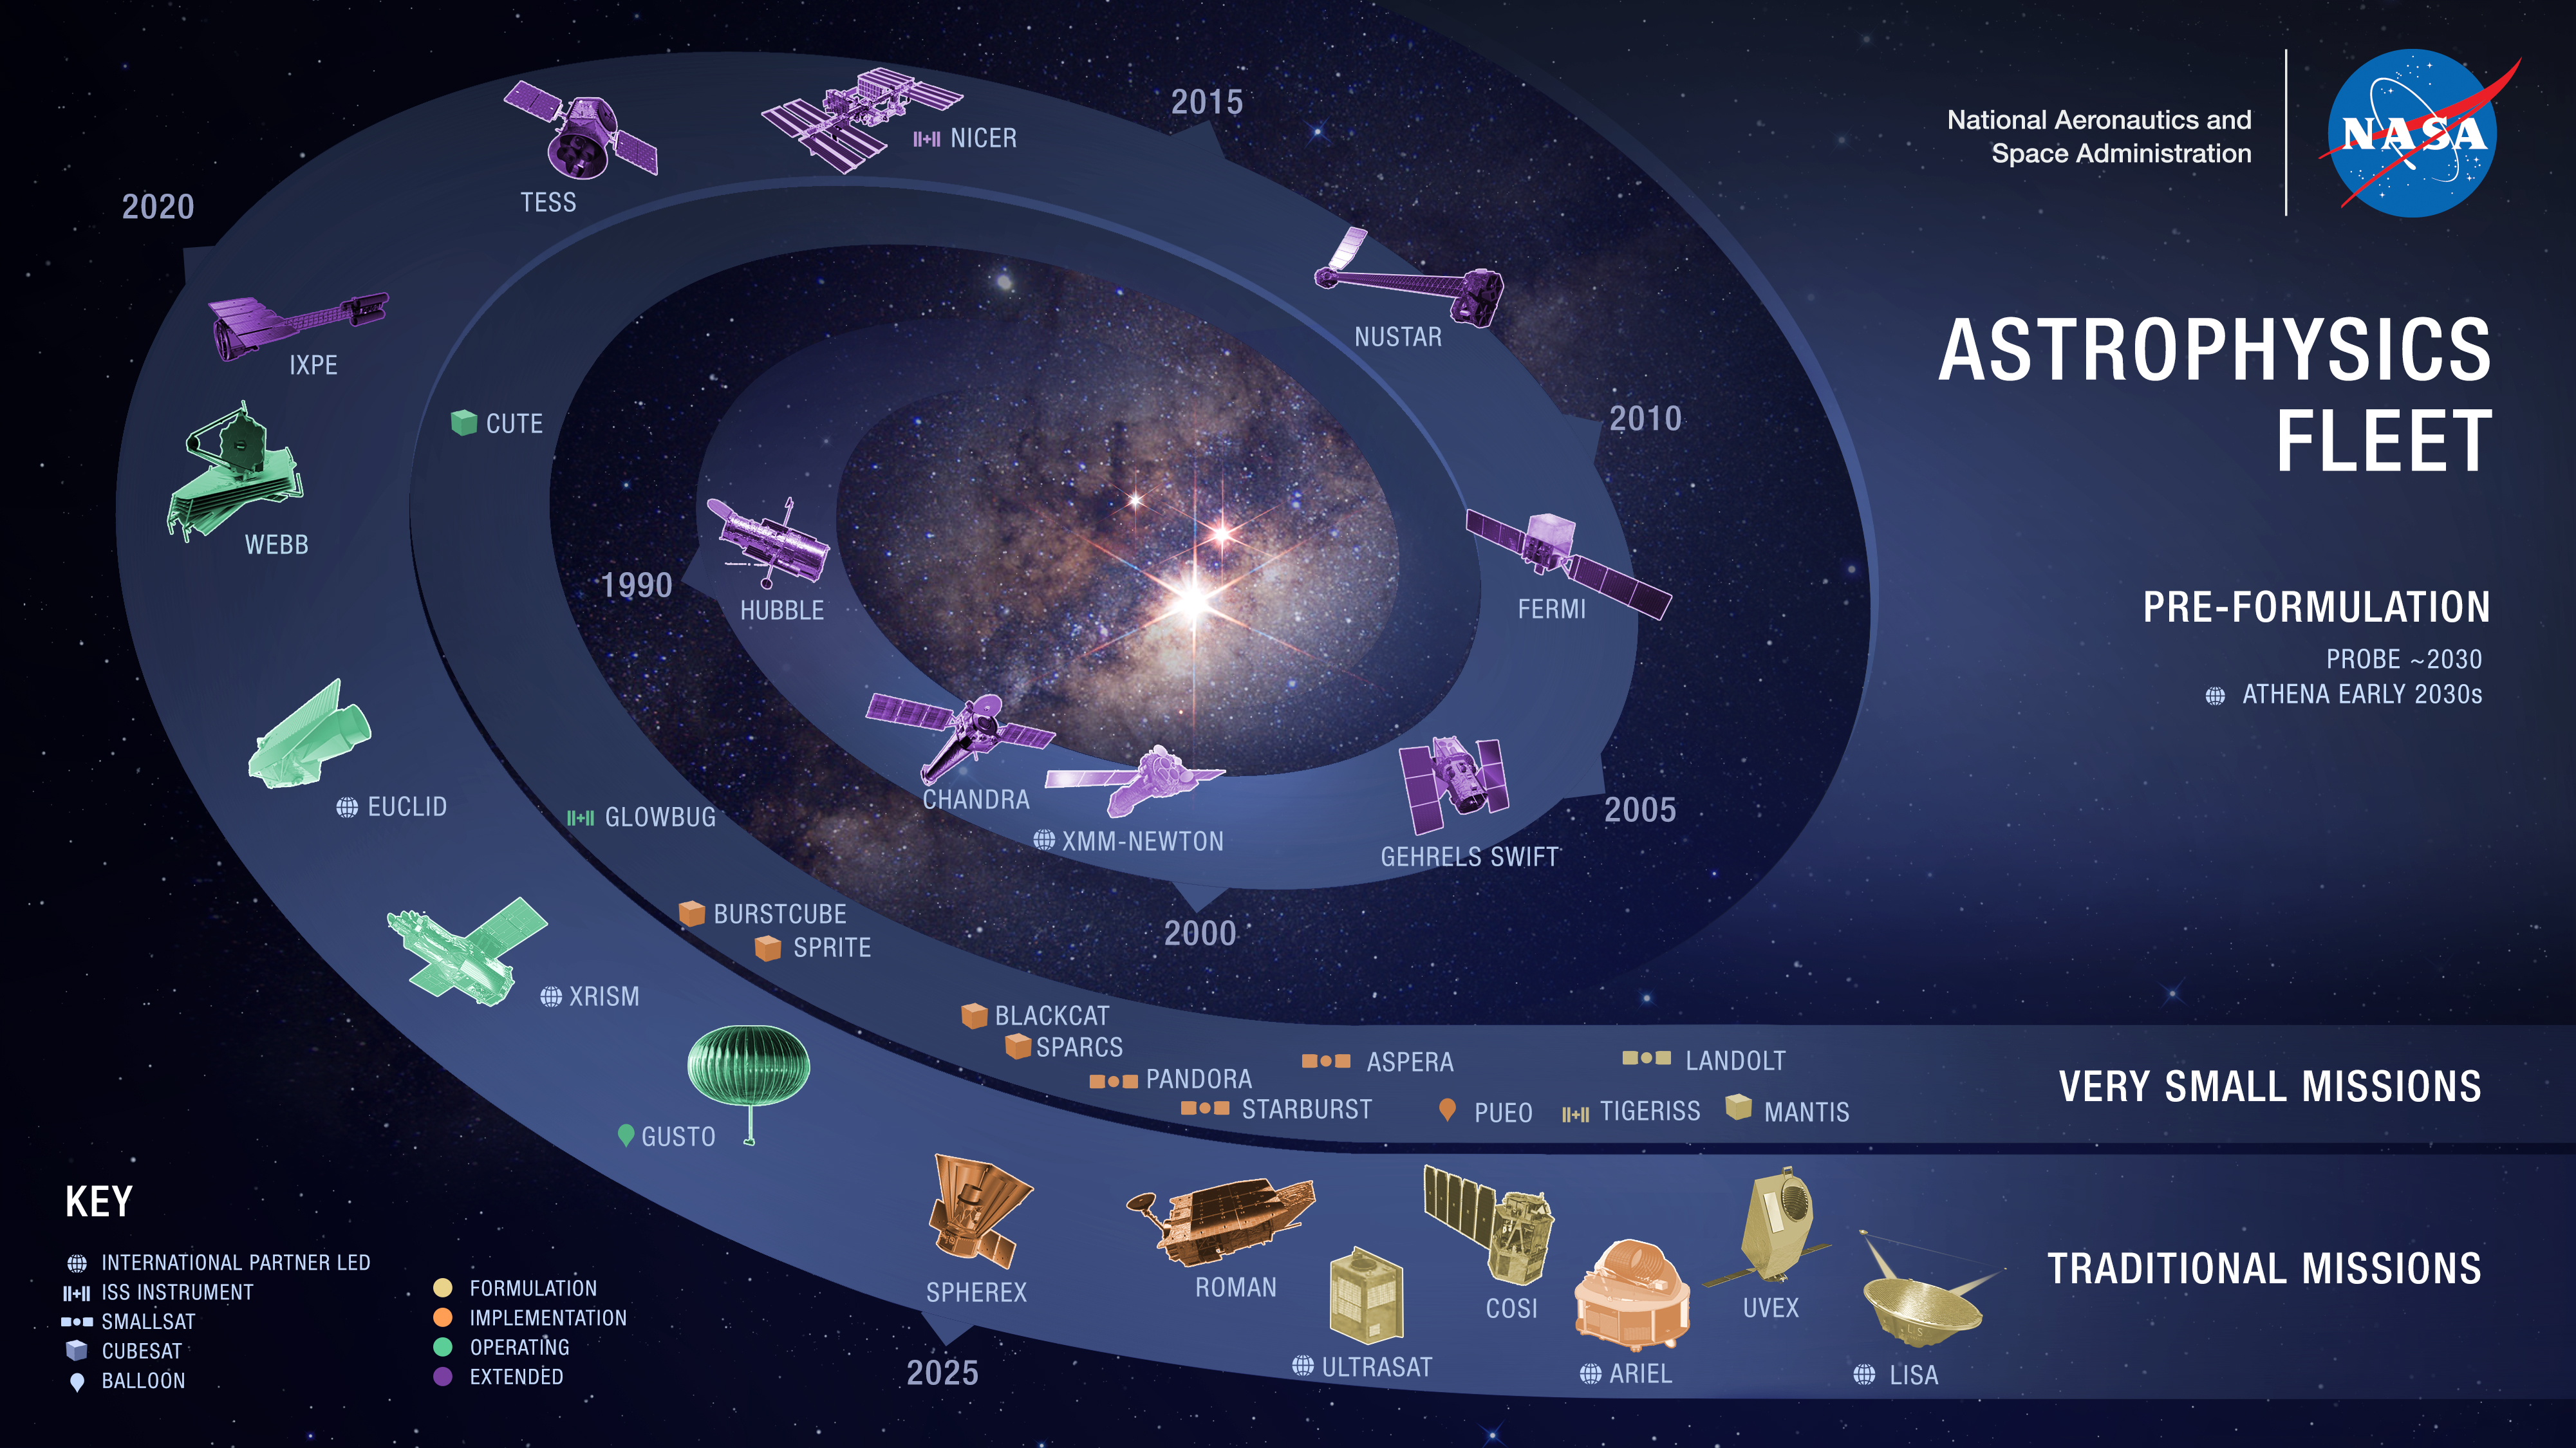 Blue spiral graphic against space background showing astrophysics mission icons